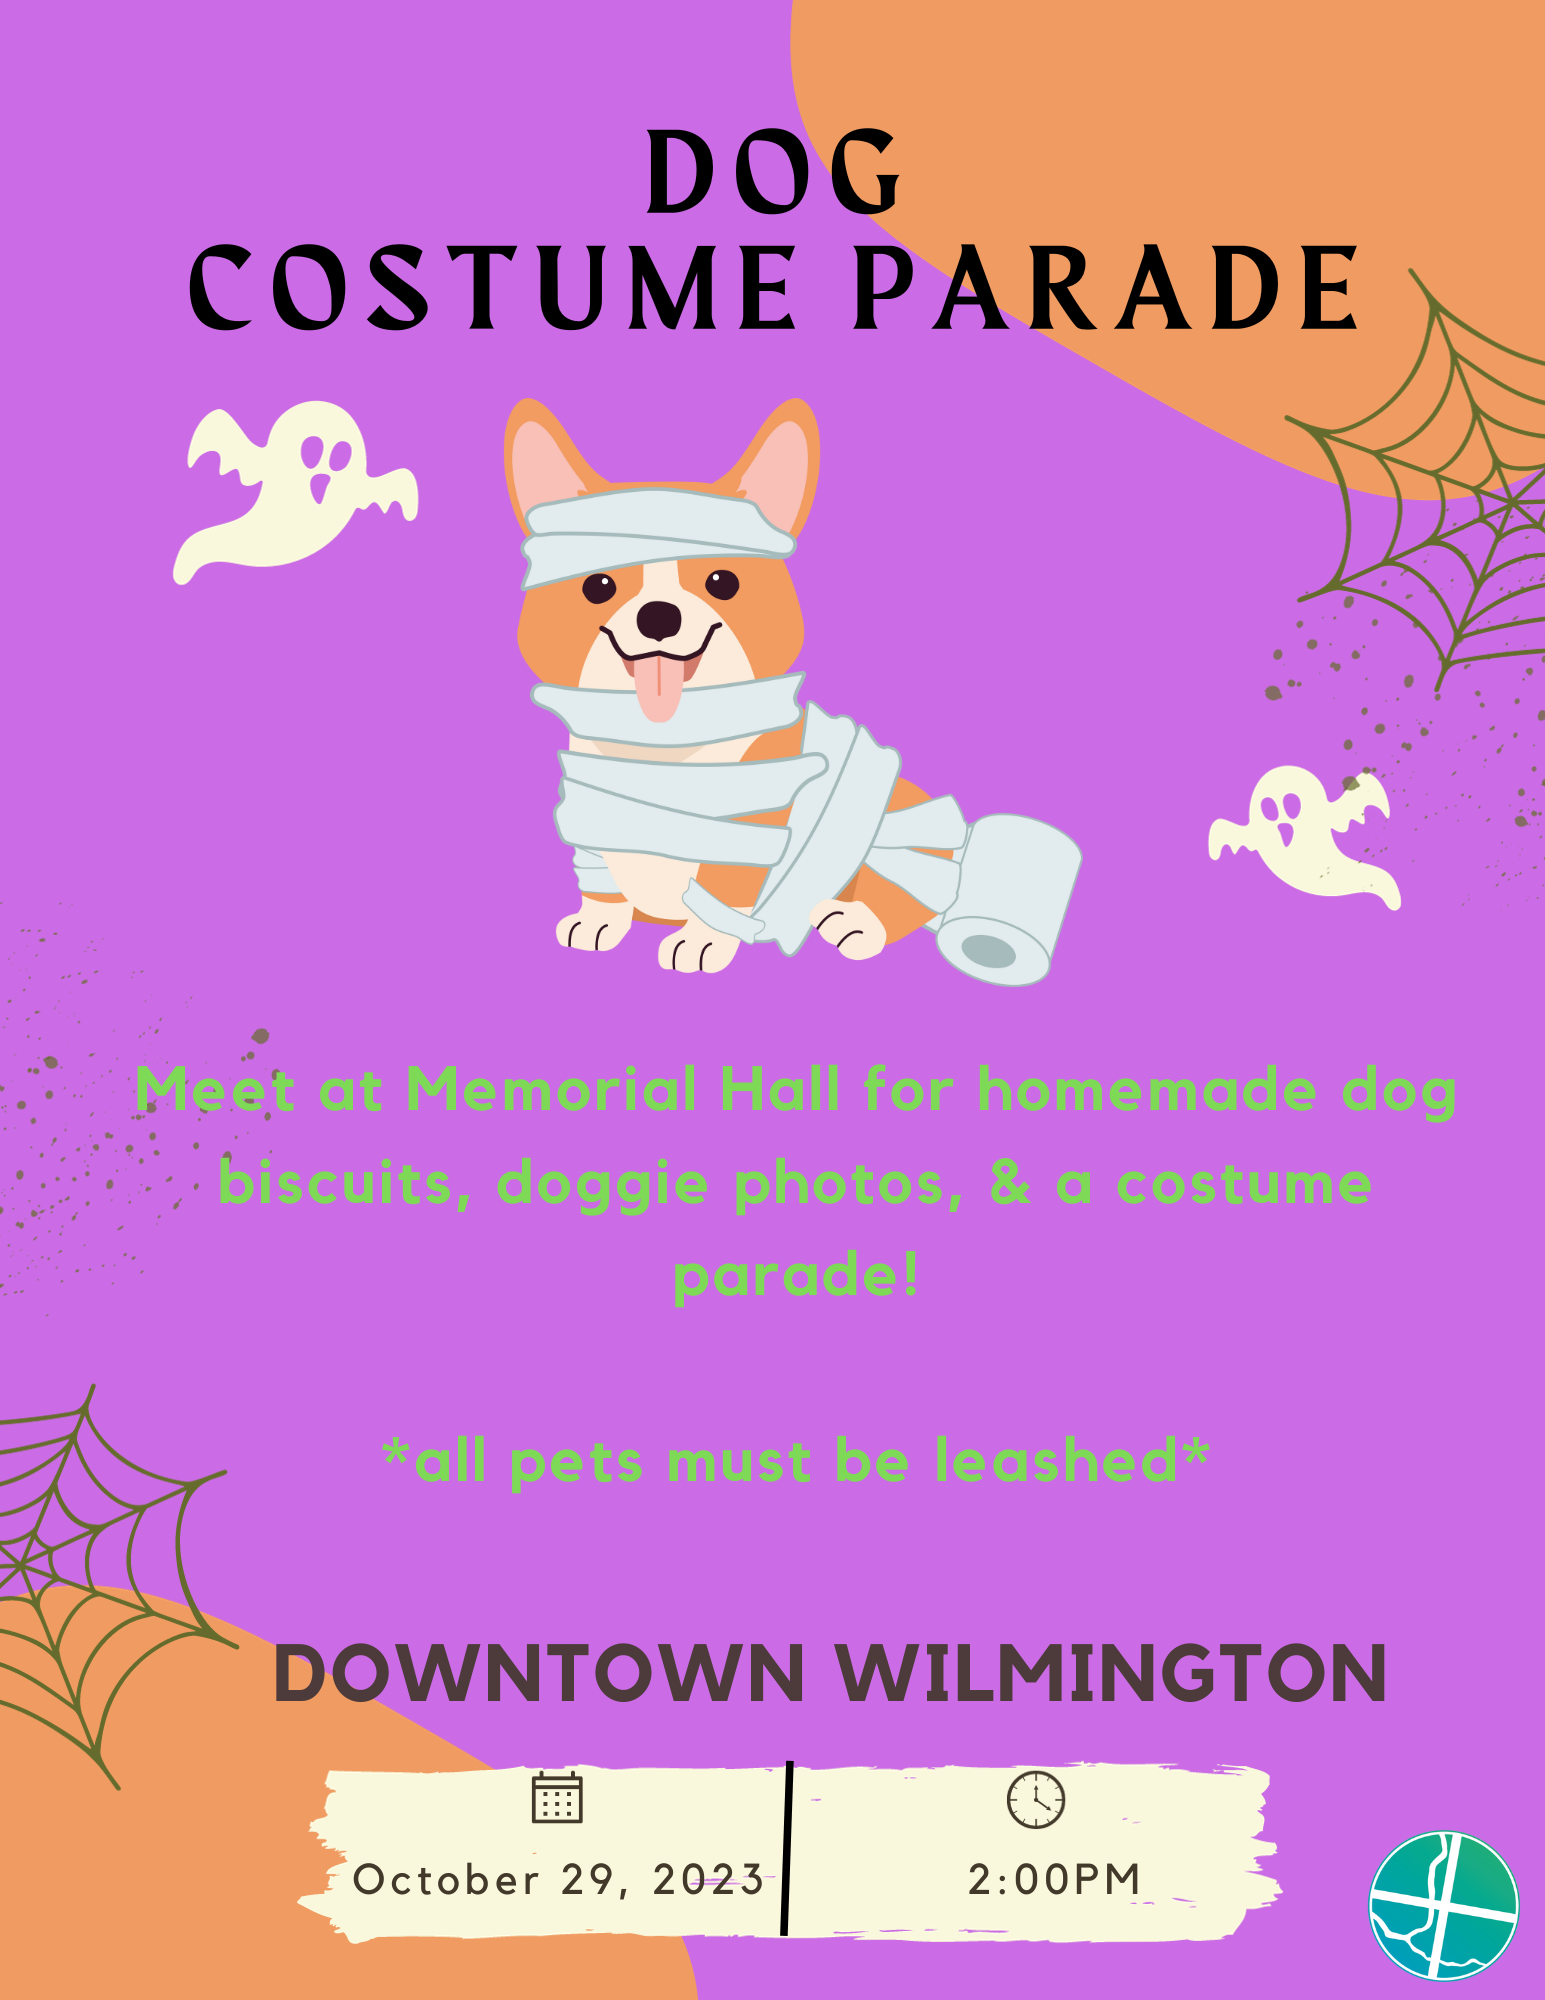 Dog Costume Parade in Downtown Wilmington! - SVDV Chamber of Commerce